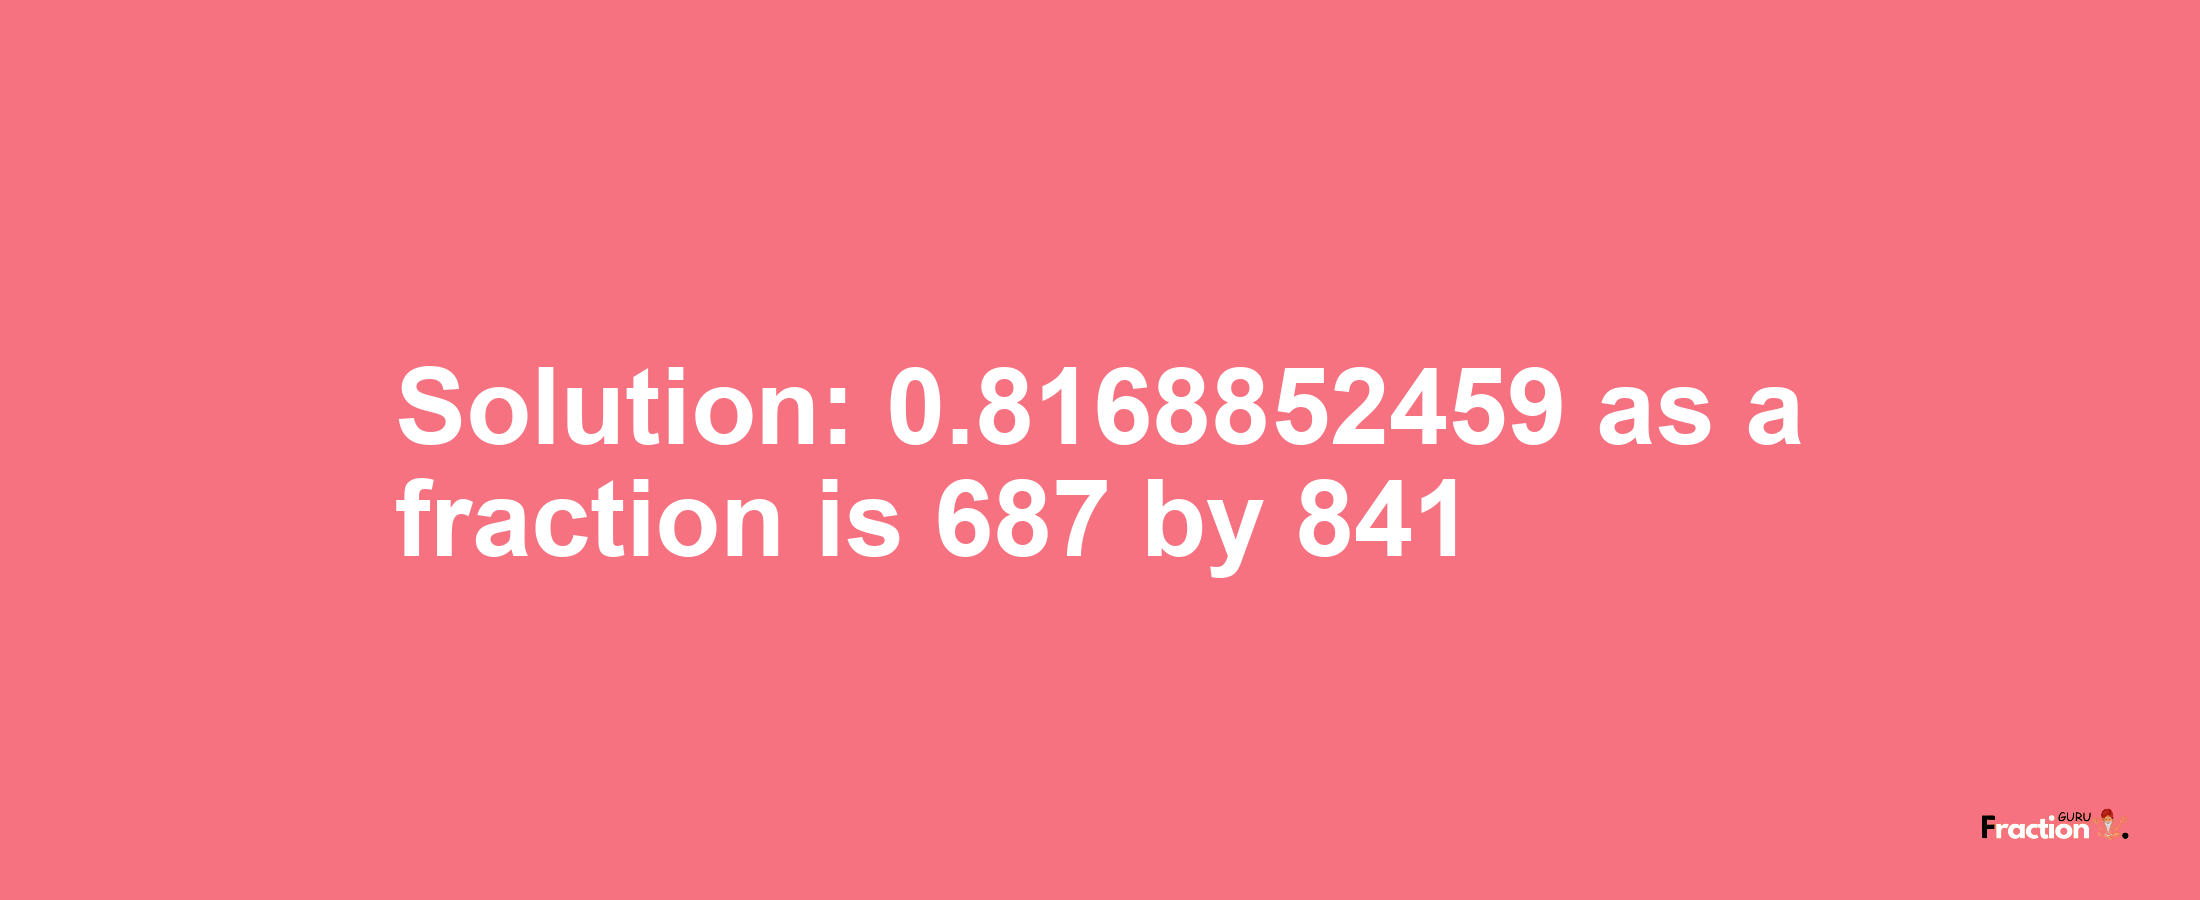 Solution:0.8168852459 as a fraction is 687/841